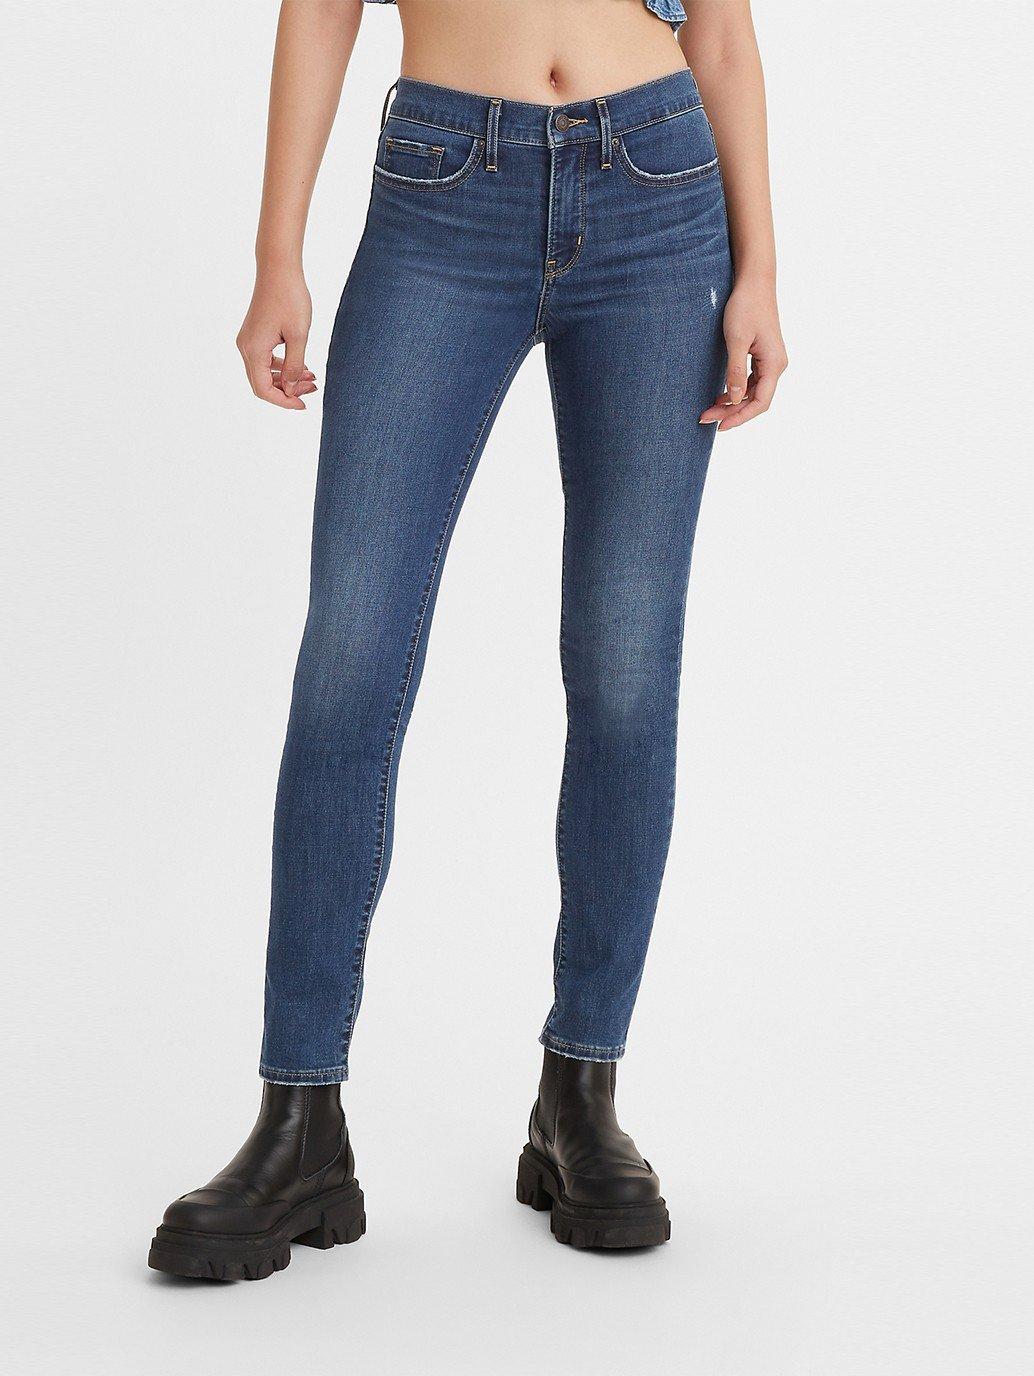 Buy Levis® Womens 311 Shaping Skinny Jeans Levis® Official Online Store My